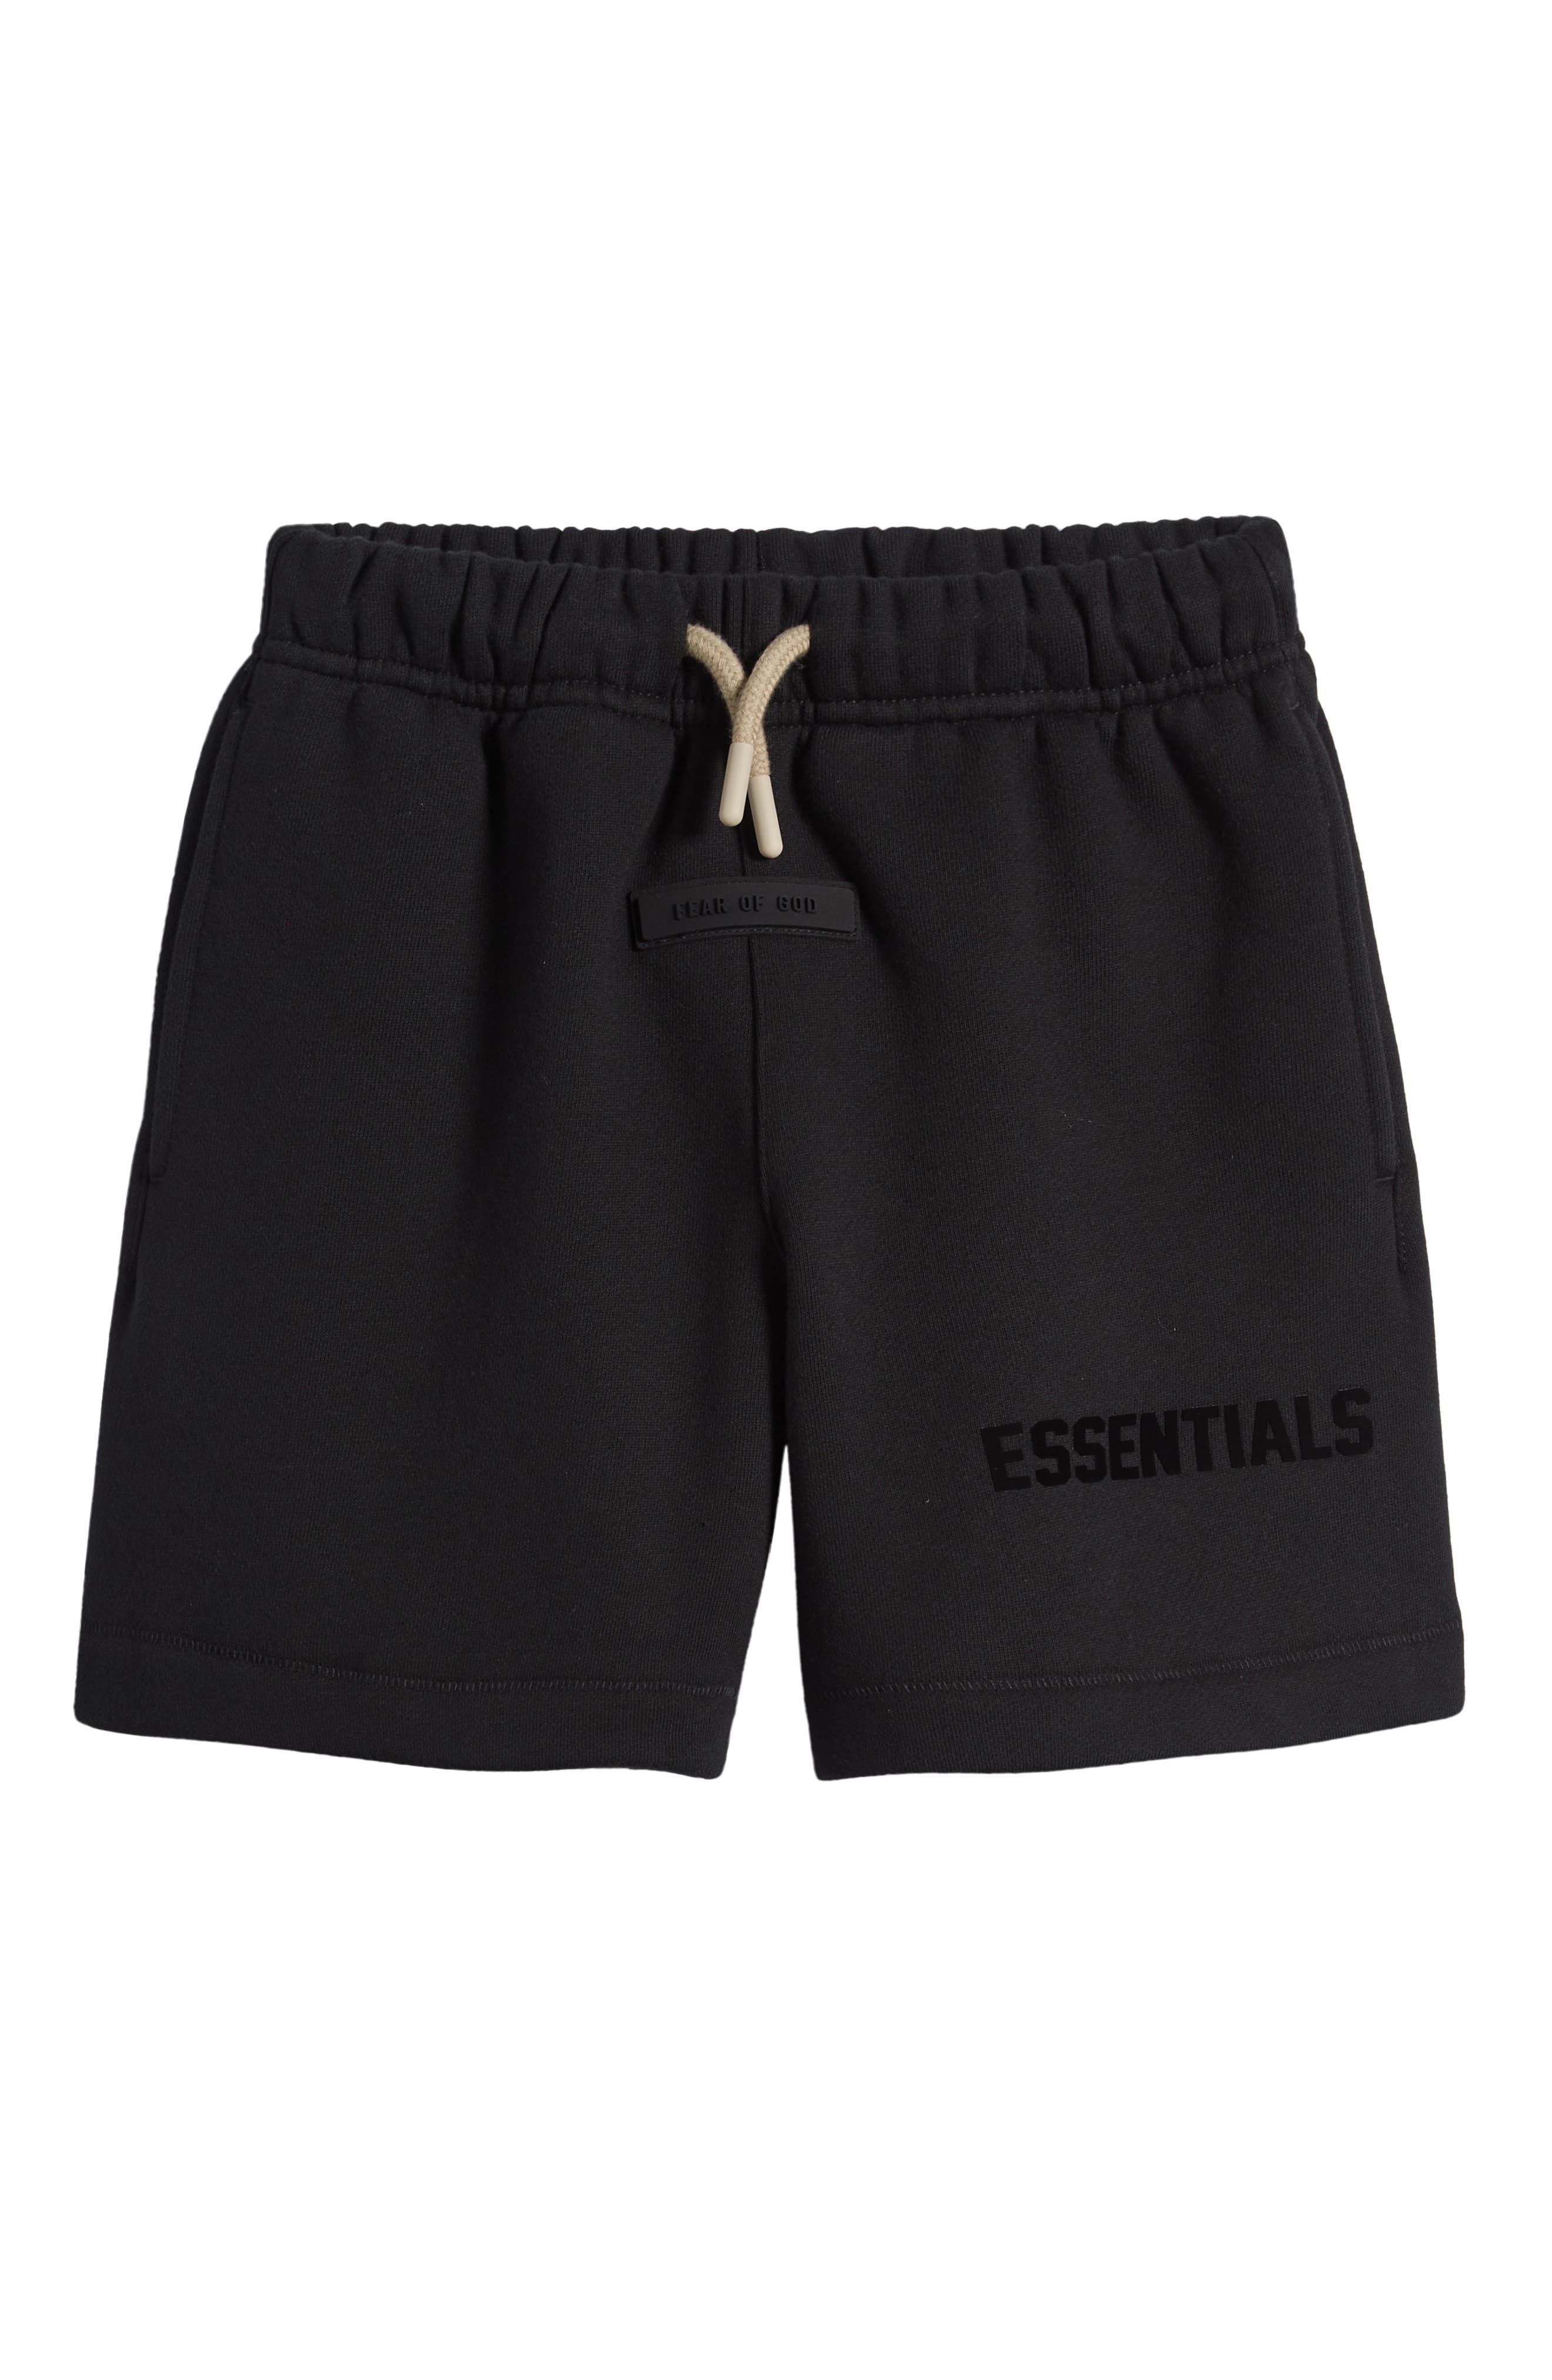 FEAR OF GOD Essentials Graphic Sweat Shorts Black S 通販